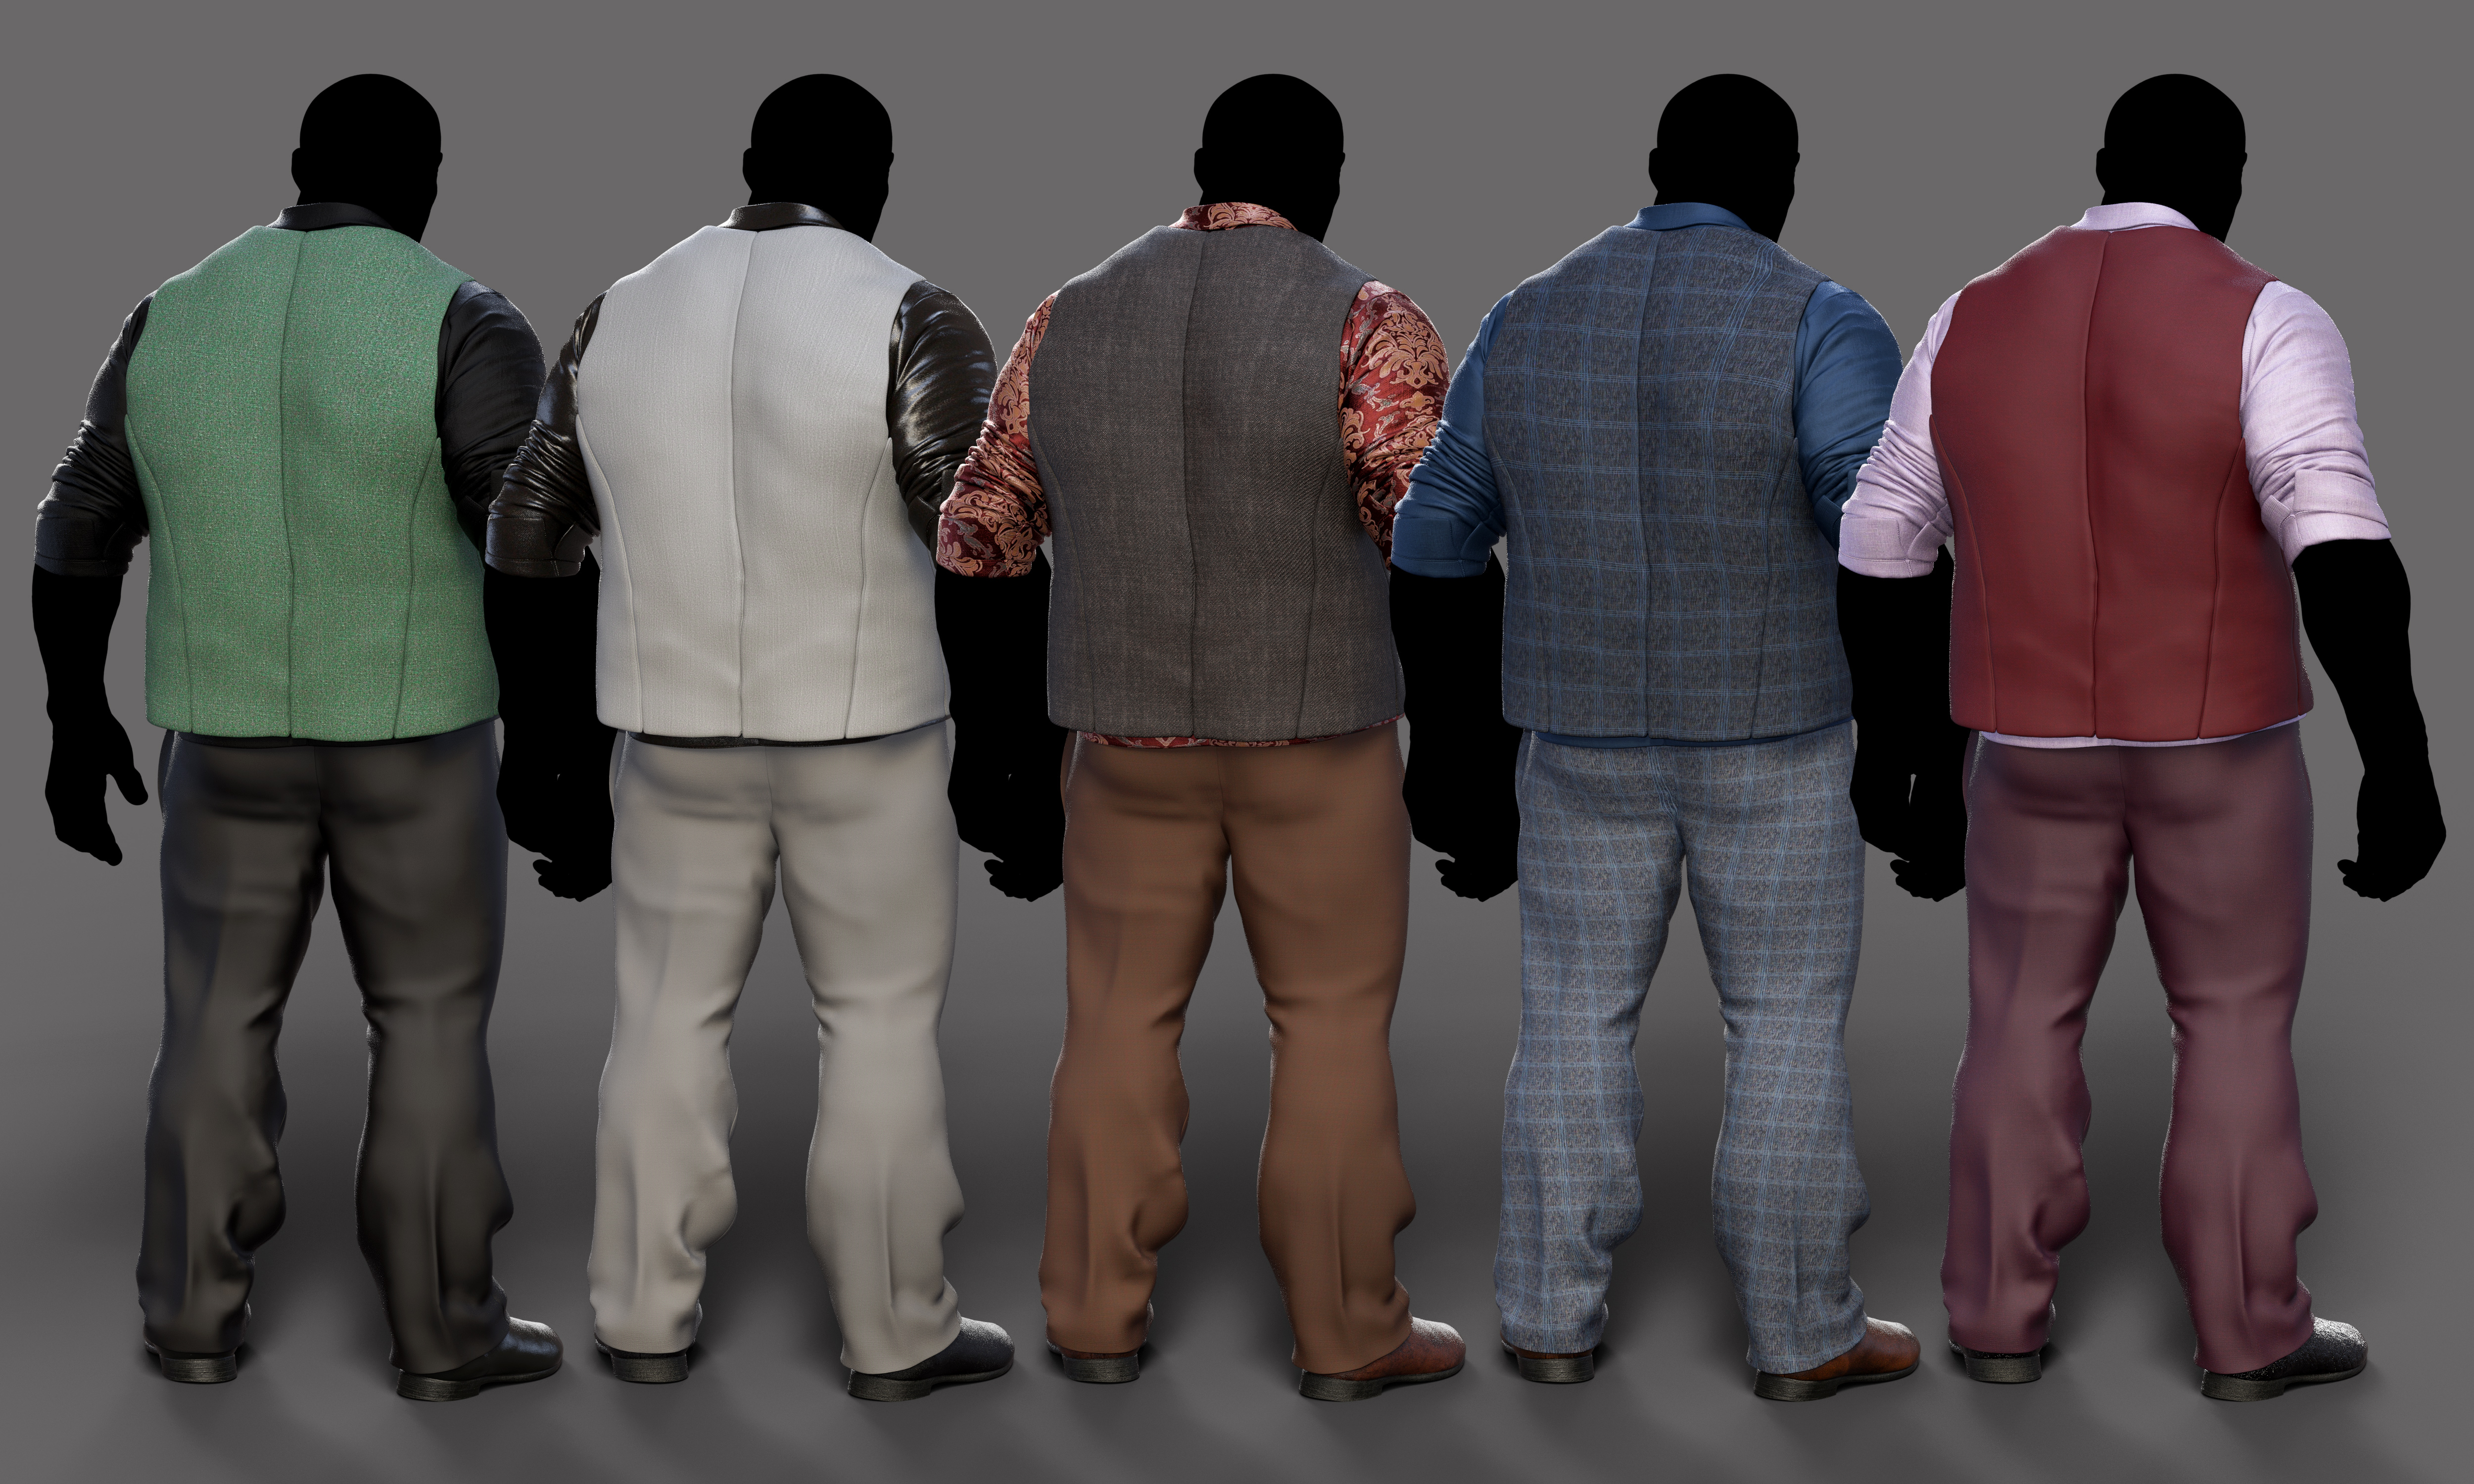 Underbelly Outfit Textures